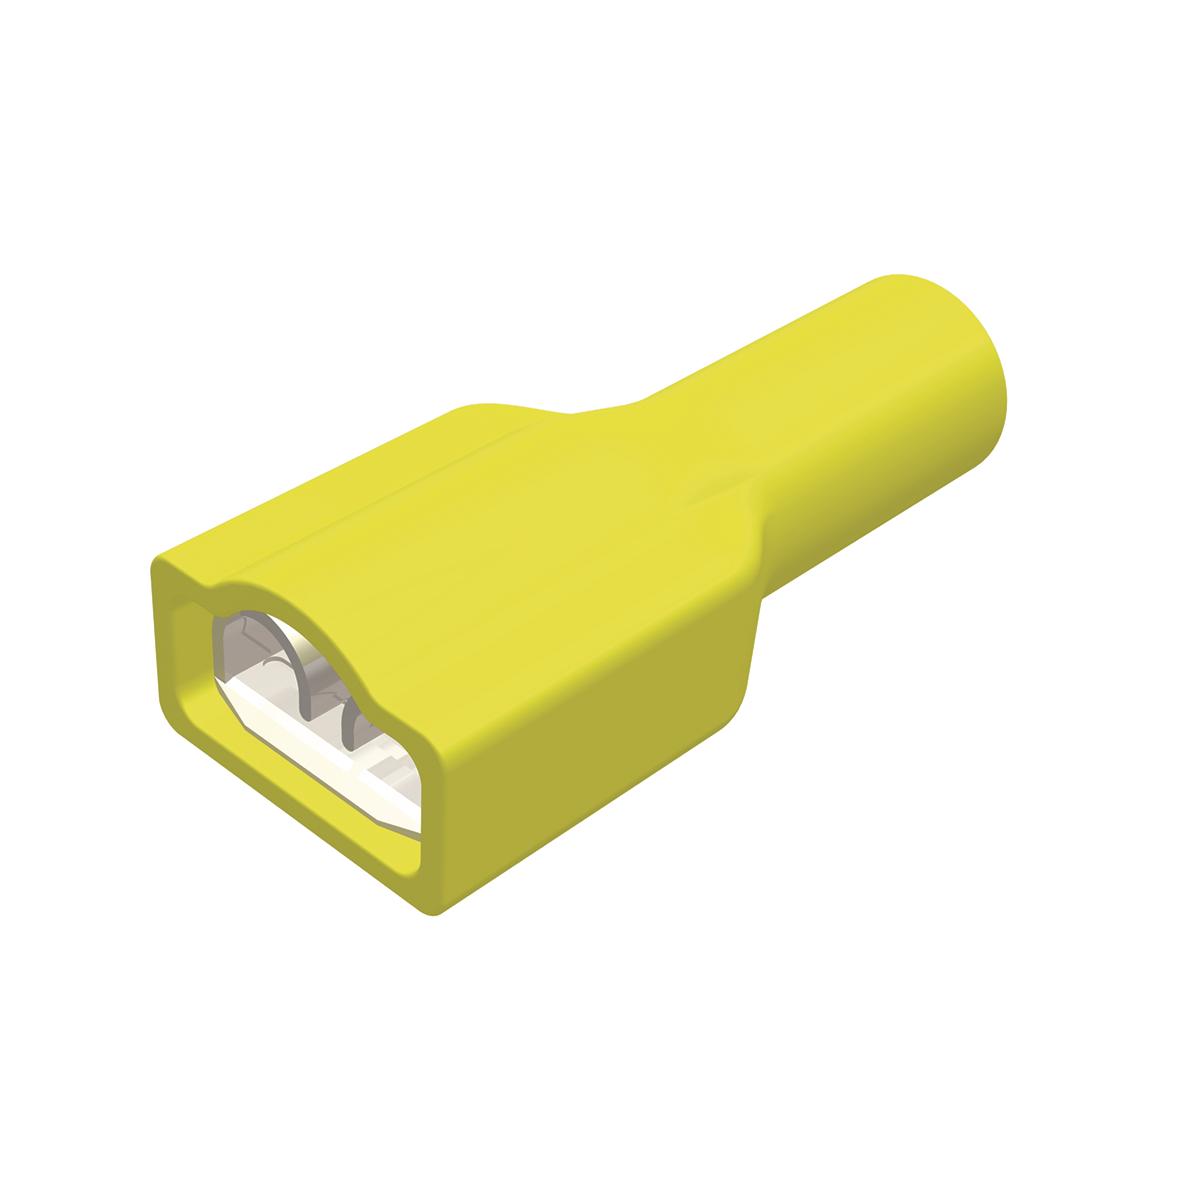 Hubbell FQN10M25X03D Fully Insulated Nylon Male Quick Disconnect For 12 - 10 AWG (.25 x .03).  ; Features: Fully Insulated Connectors: Eliminate The Need For Post Installation Insulation, Funnel Entry Barrel Opening: Assures Quick And Easy Wire Insertion, Dimpled Female Socke